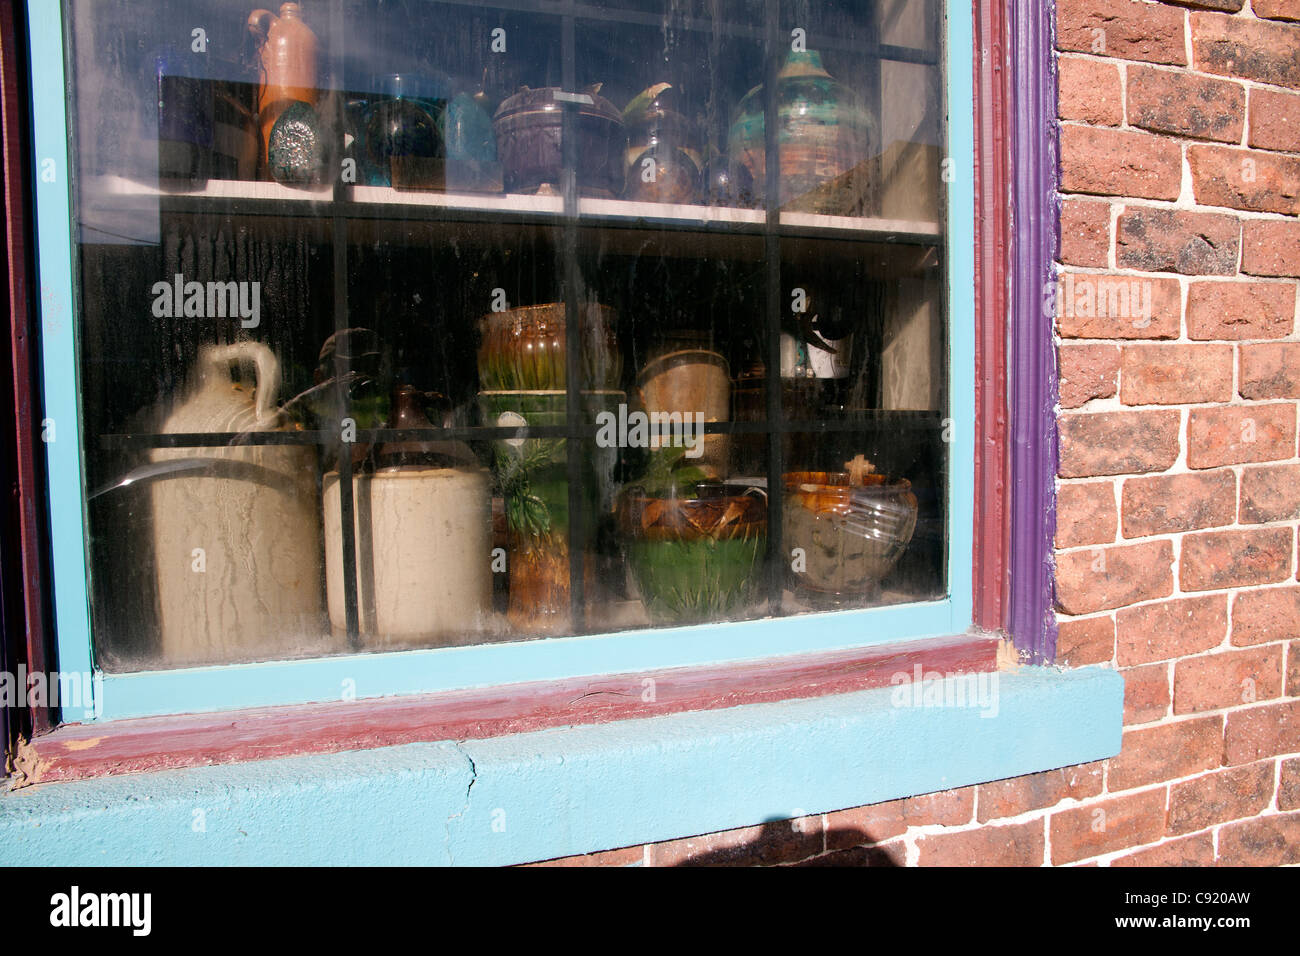 Crock Pots and Jugs in window of antique shop Indiana USA Stock Photo